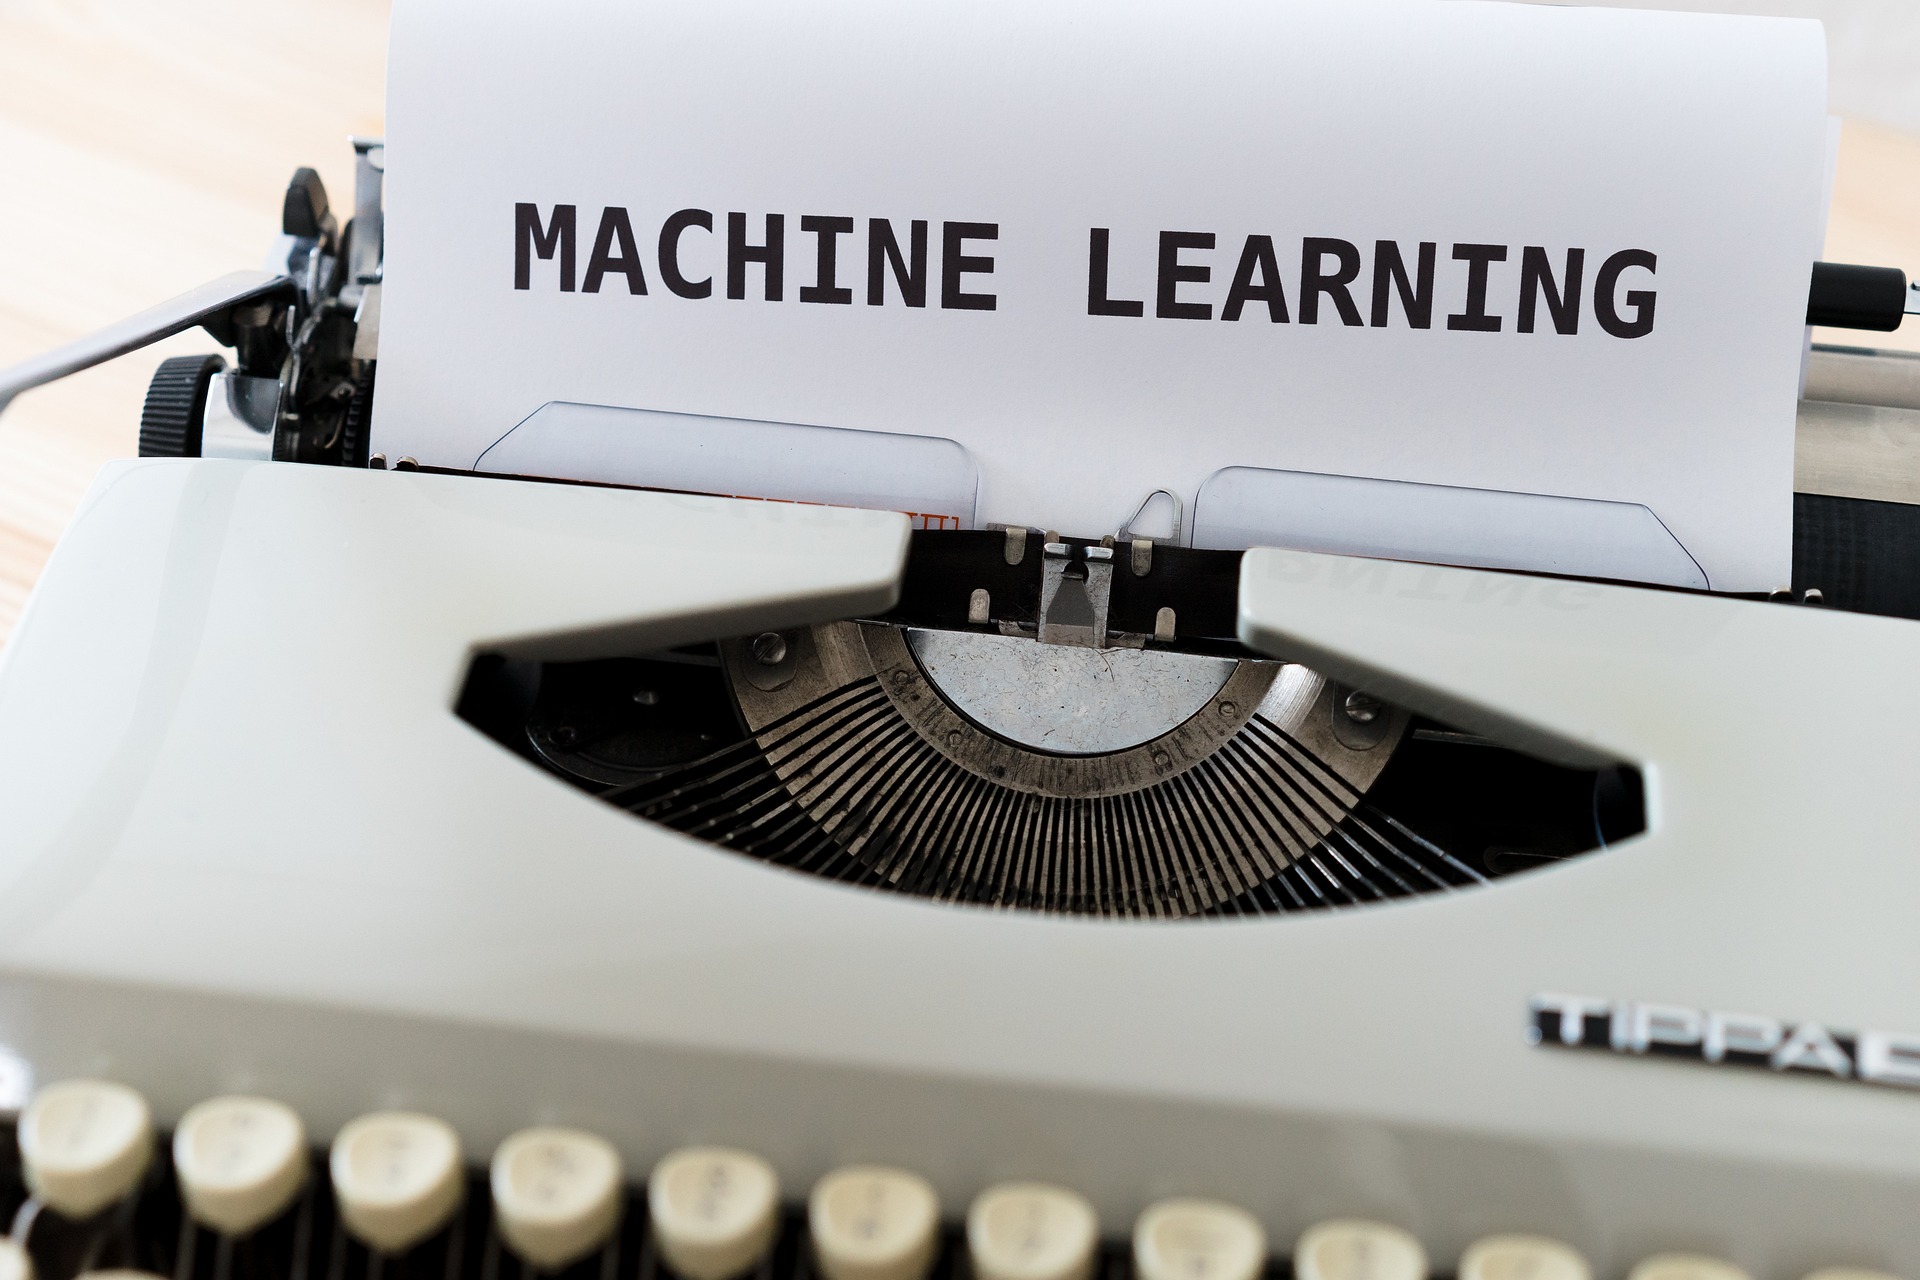 A typewriter with the text "Machine Learning" on the sheet.  Image by Markus Winkler from Pixabay 